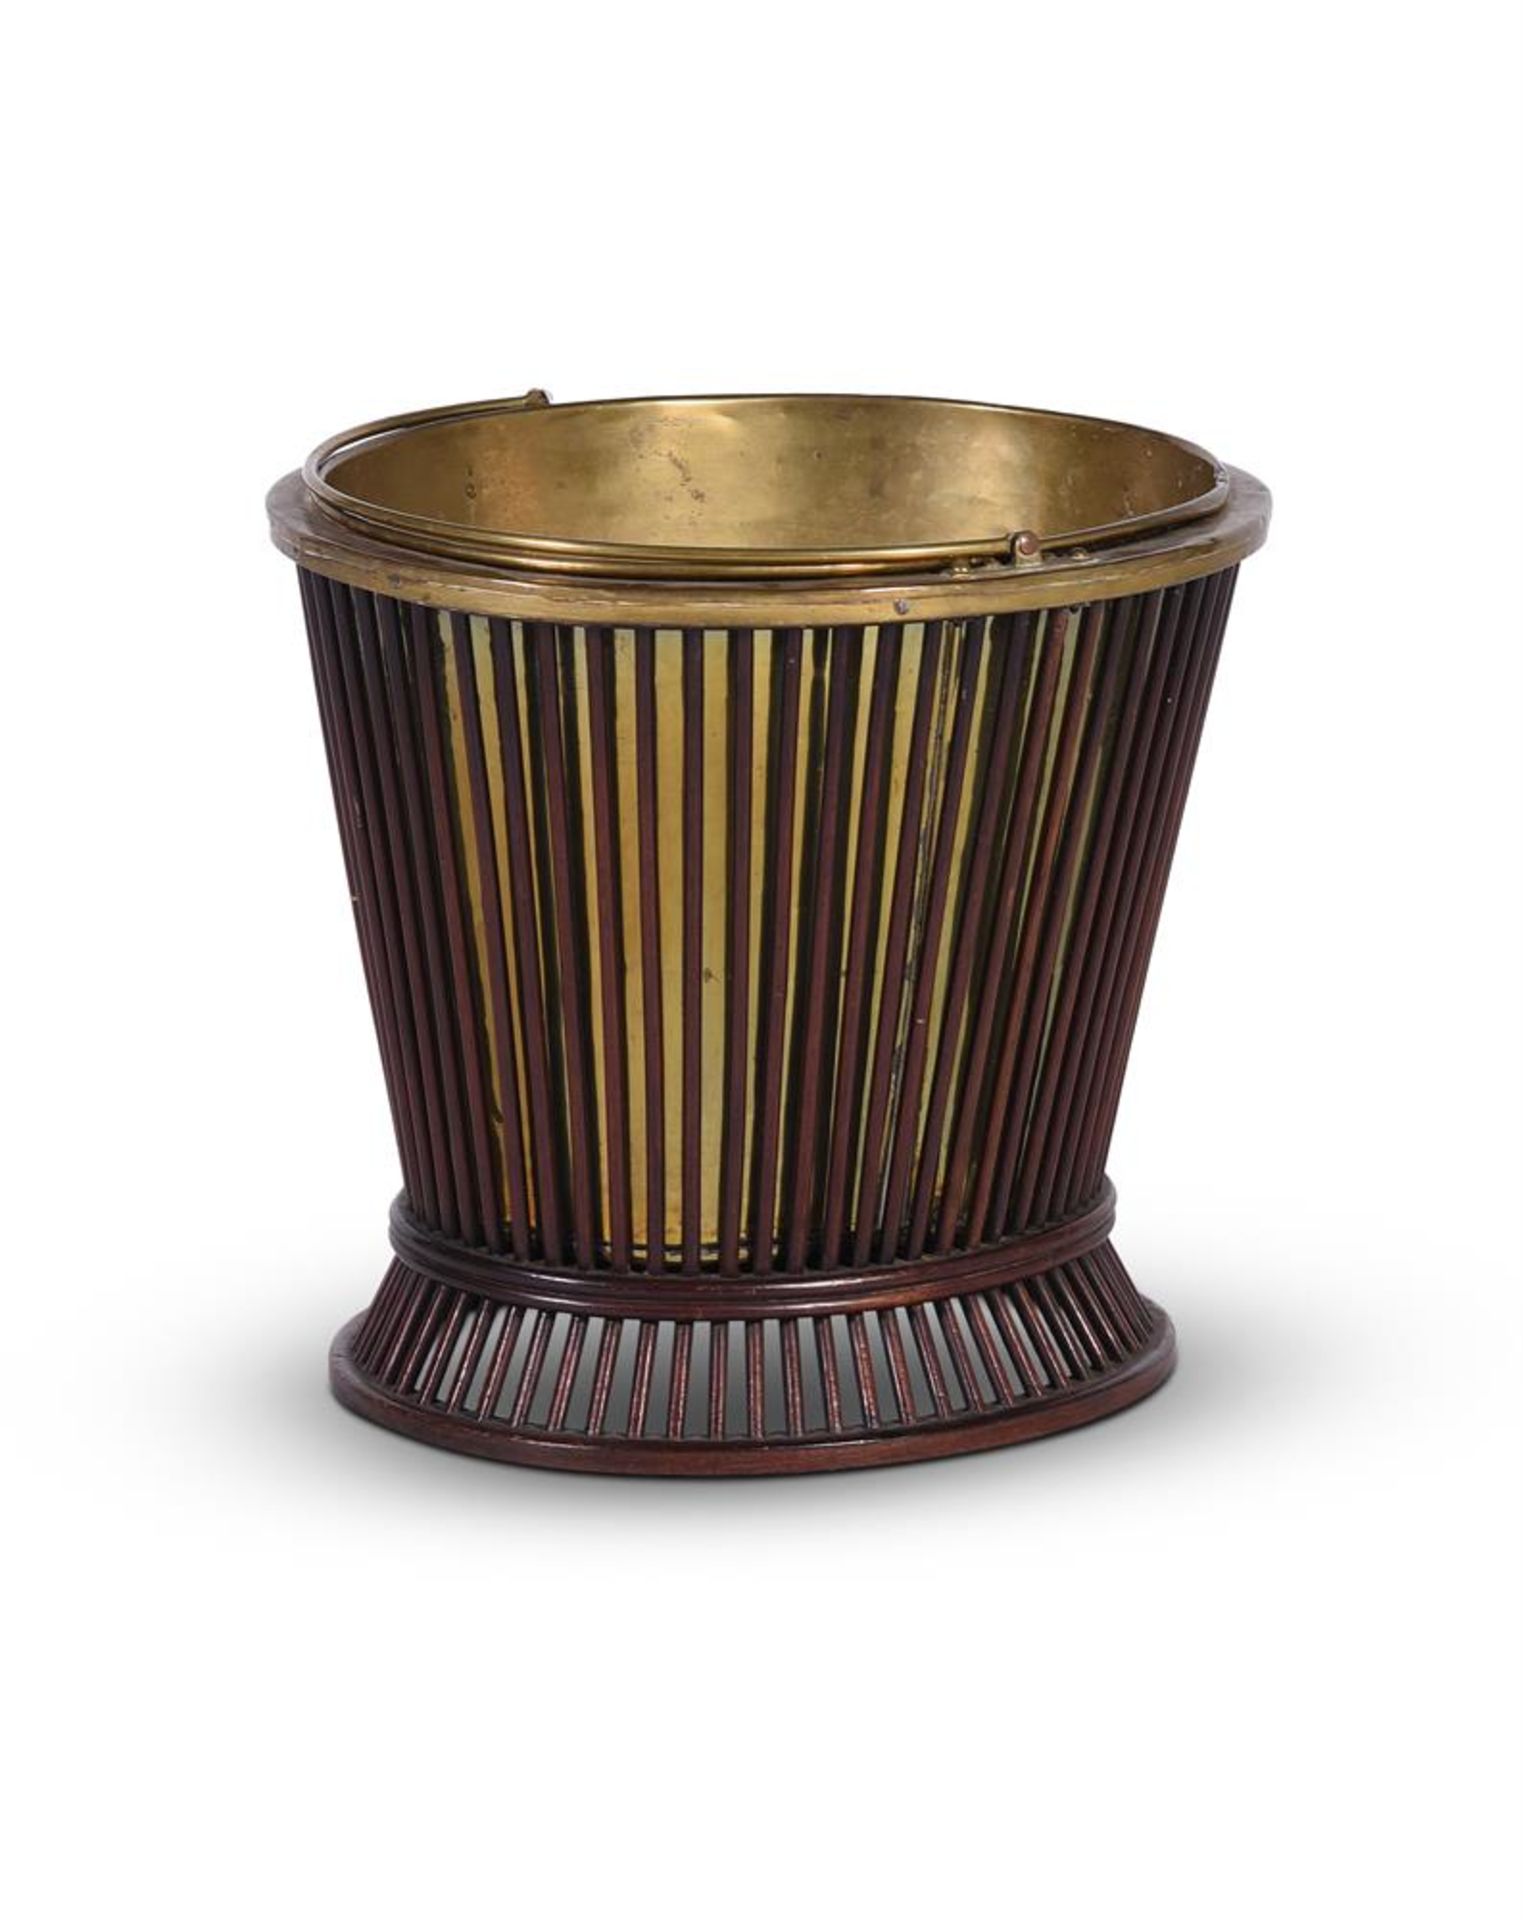 A GEORGE III MAHOGANY 'SPINDLE' BUCKET, LATE 18TH CENTURY - Image 2 of 2